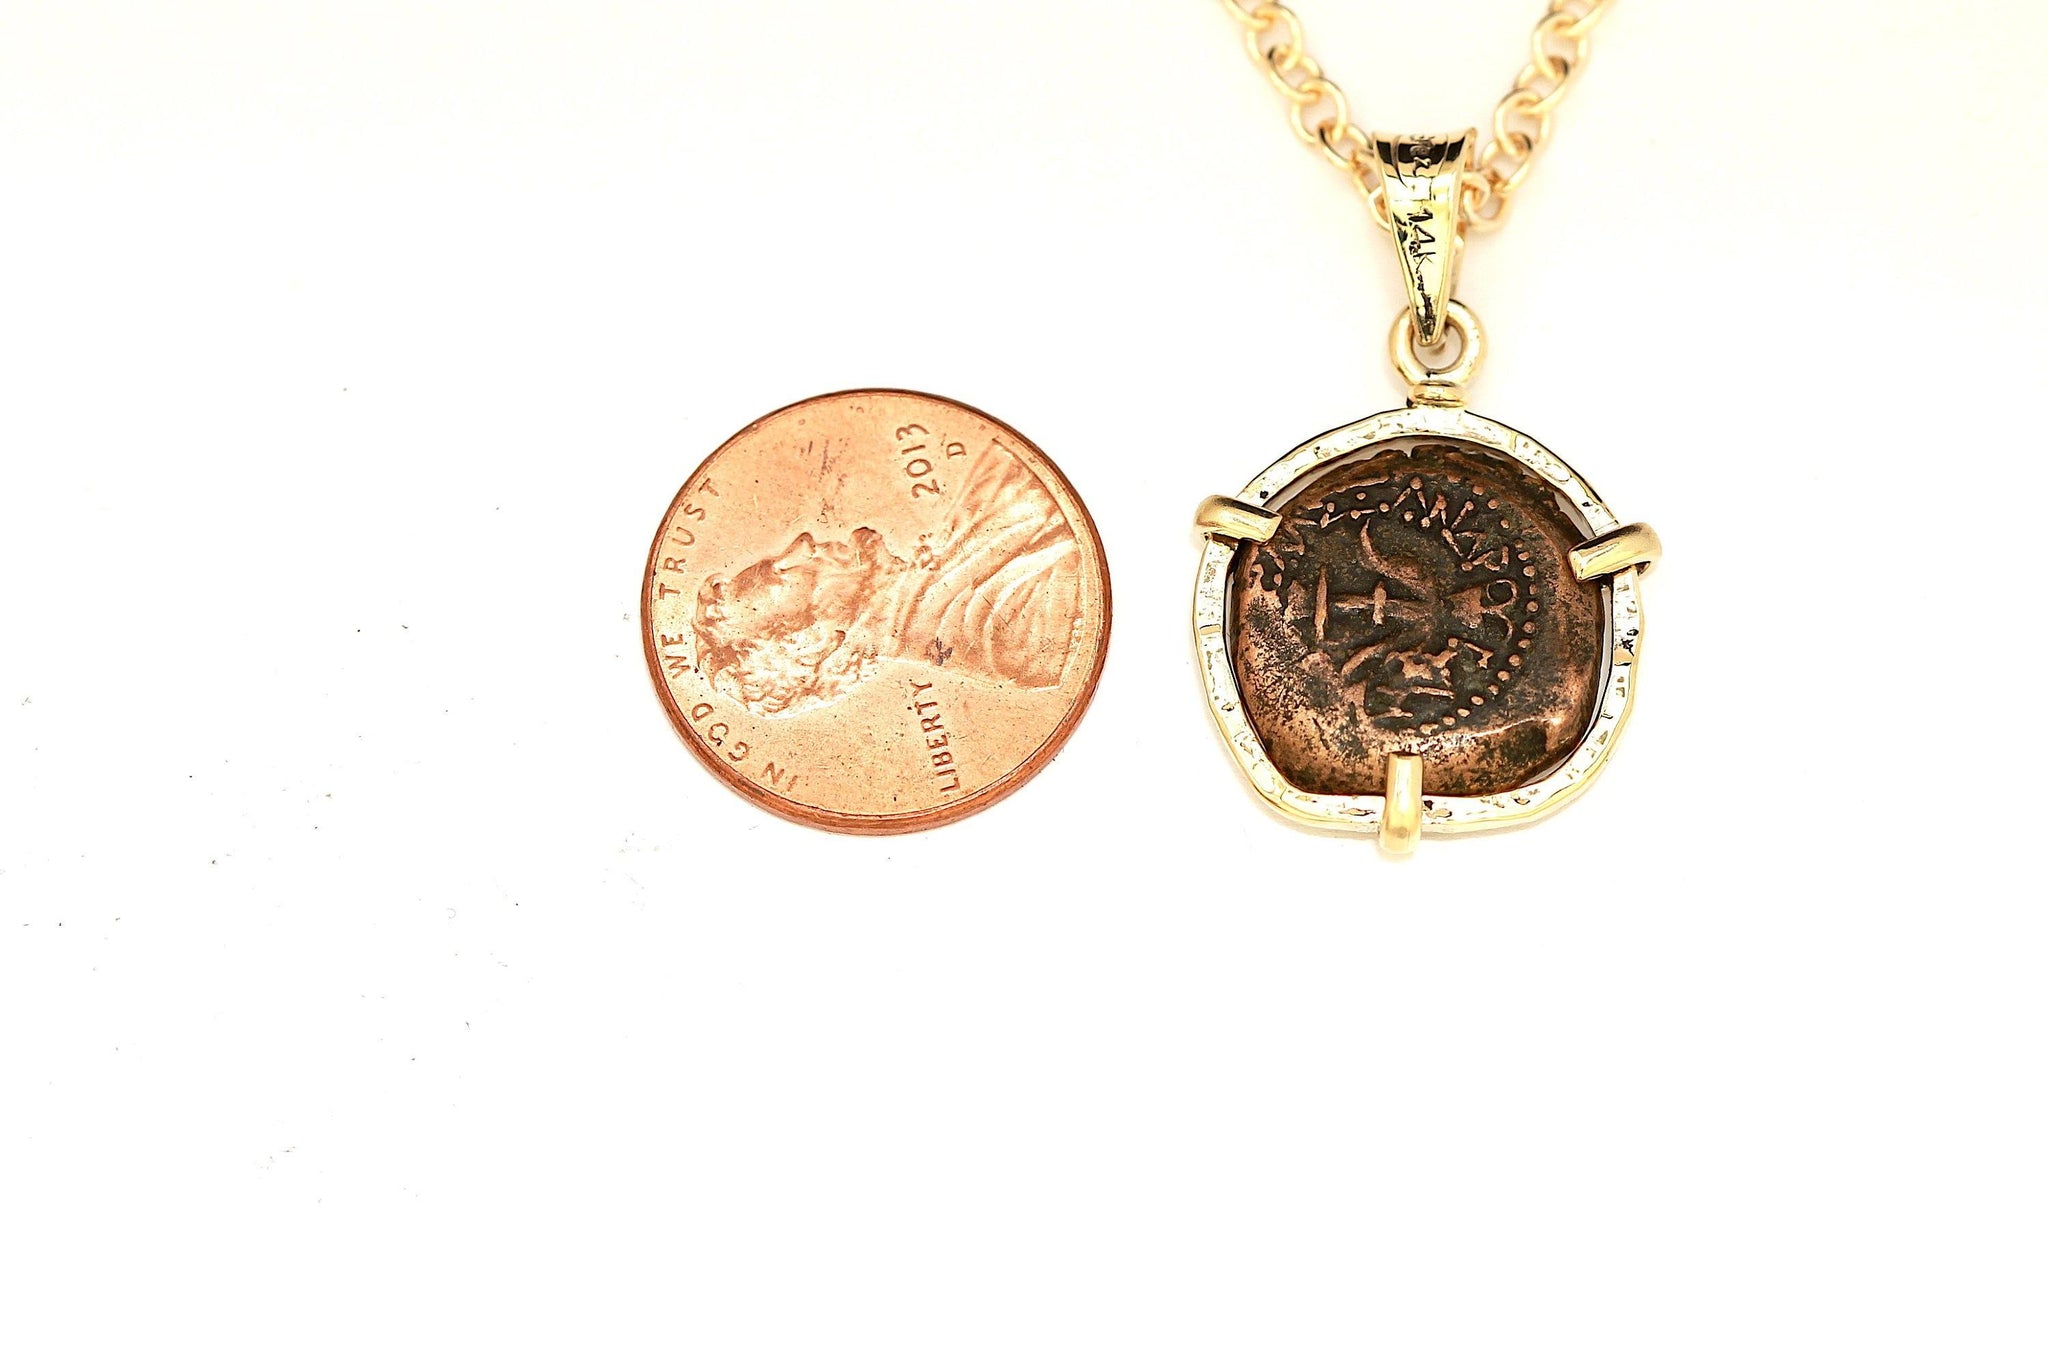 Widows Mite Coin, 14K Gold Pendant, Genuine Ancient Coin, with Certificate 6600 - Erez Ancient Coin Jewelry 